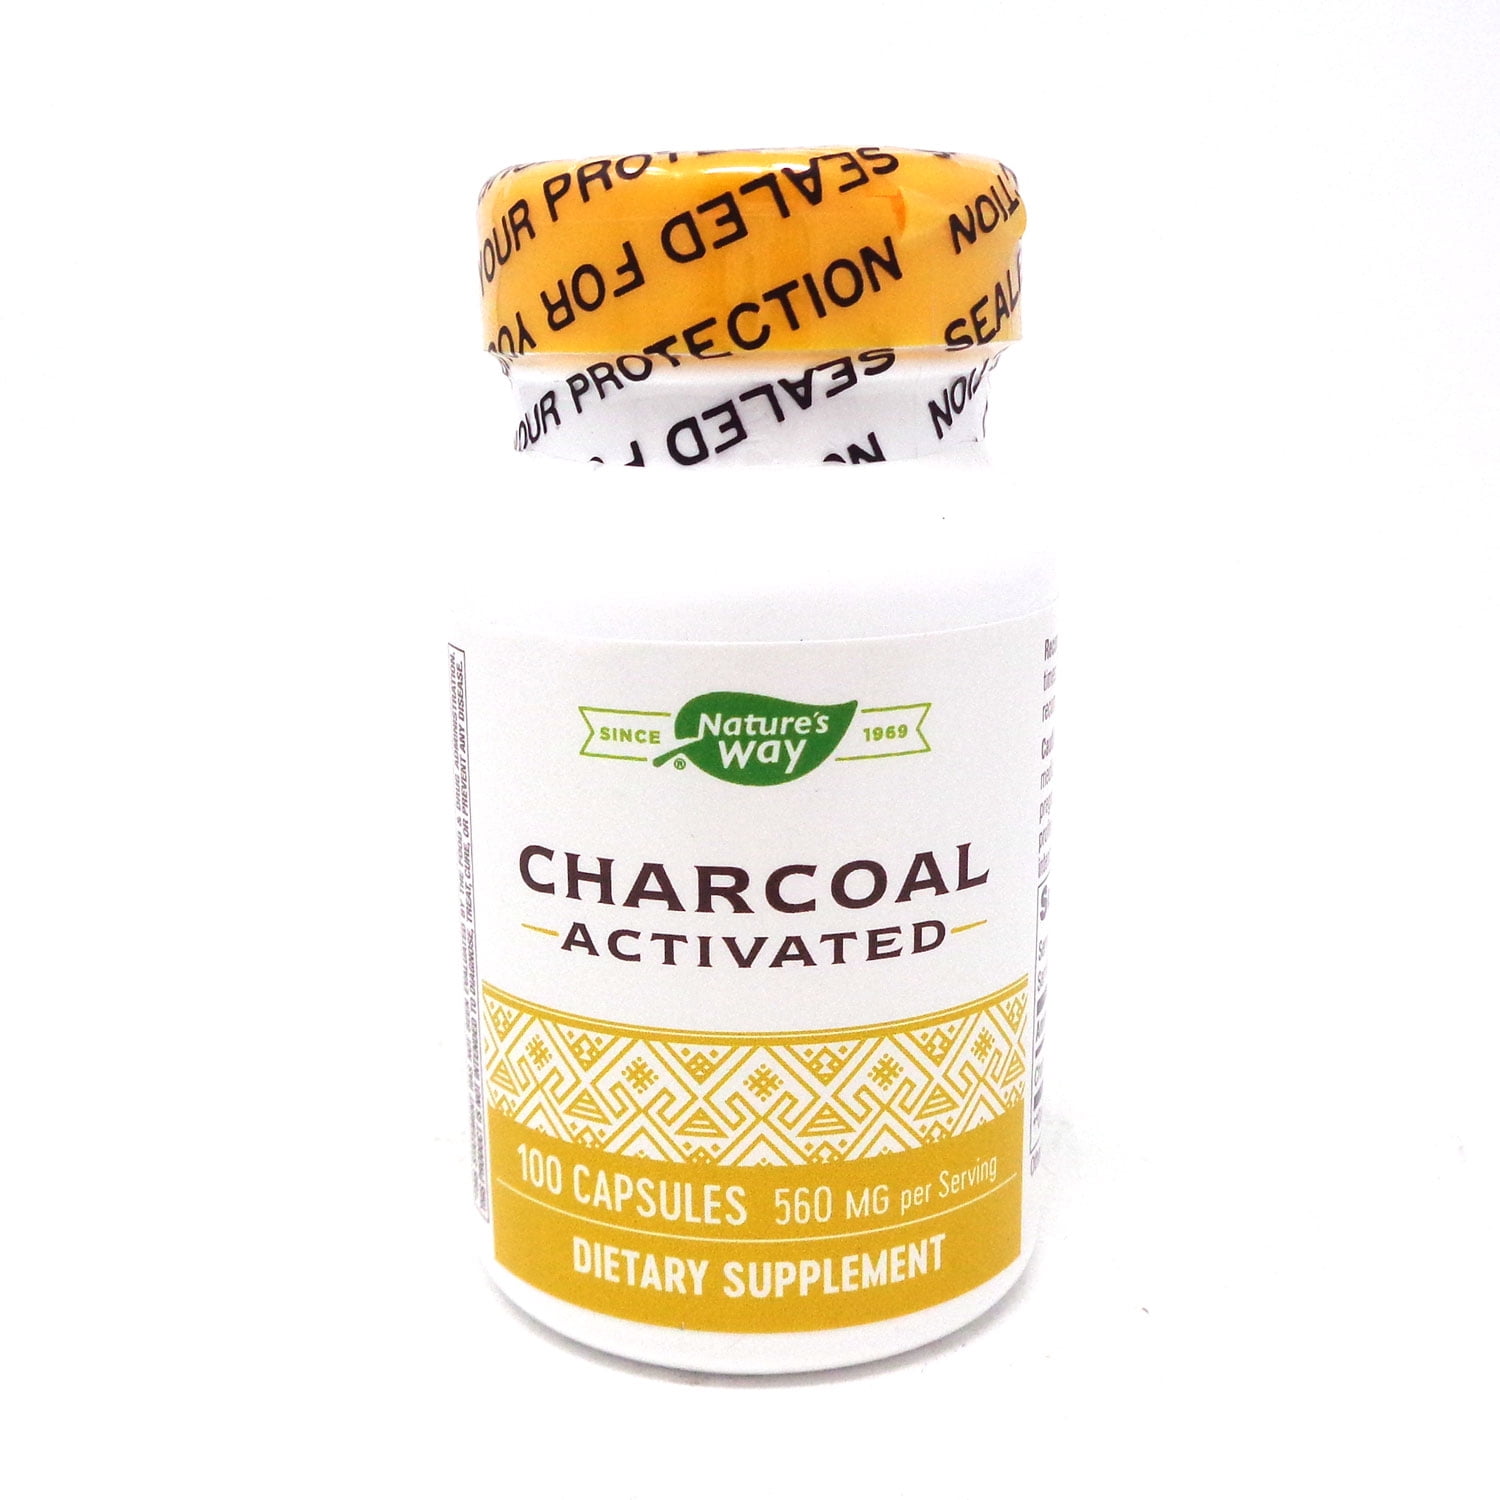 Where To Find Activated Charcoal In Walmart + Grocery Stores?